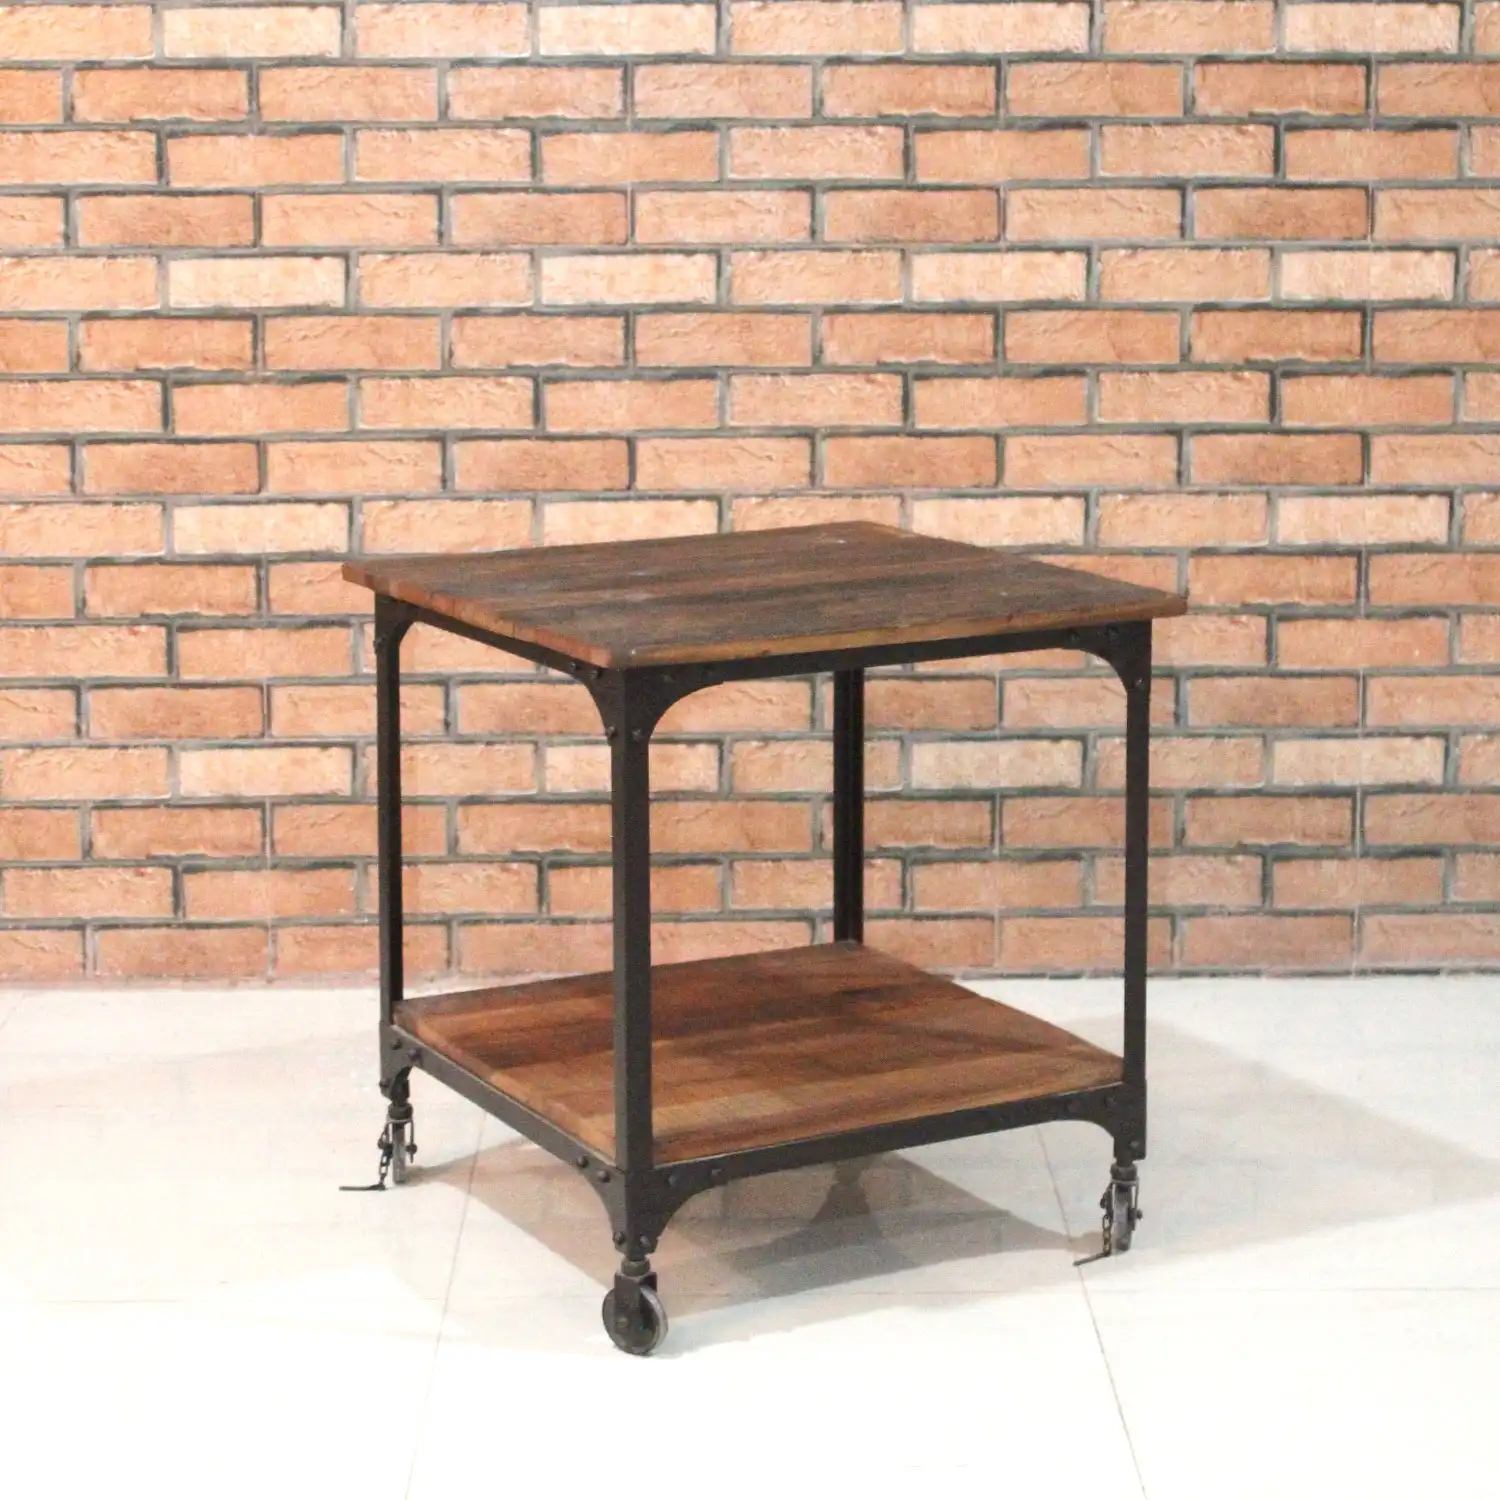 2 Tier Industrial Wooden & Iron Coffee Table with Wheels - popular handicrafts